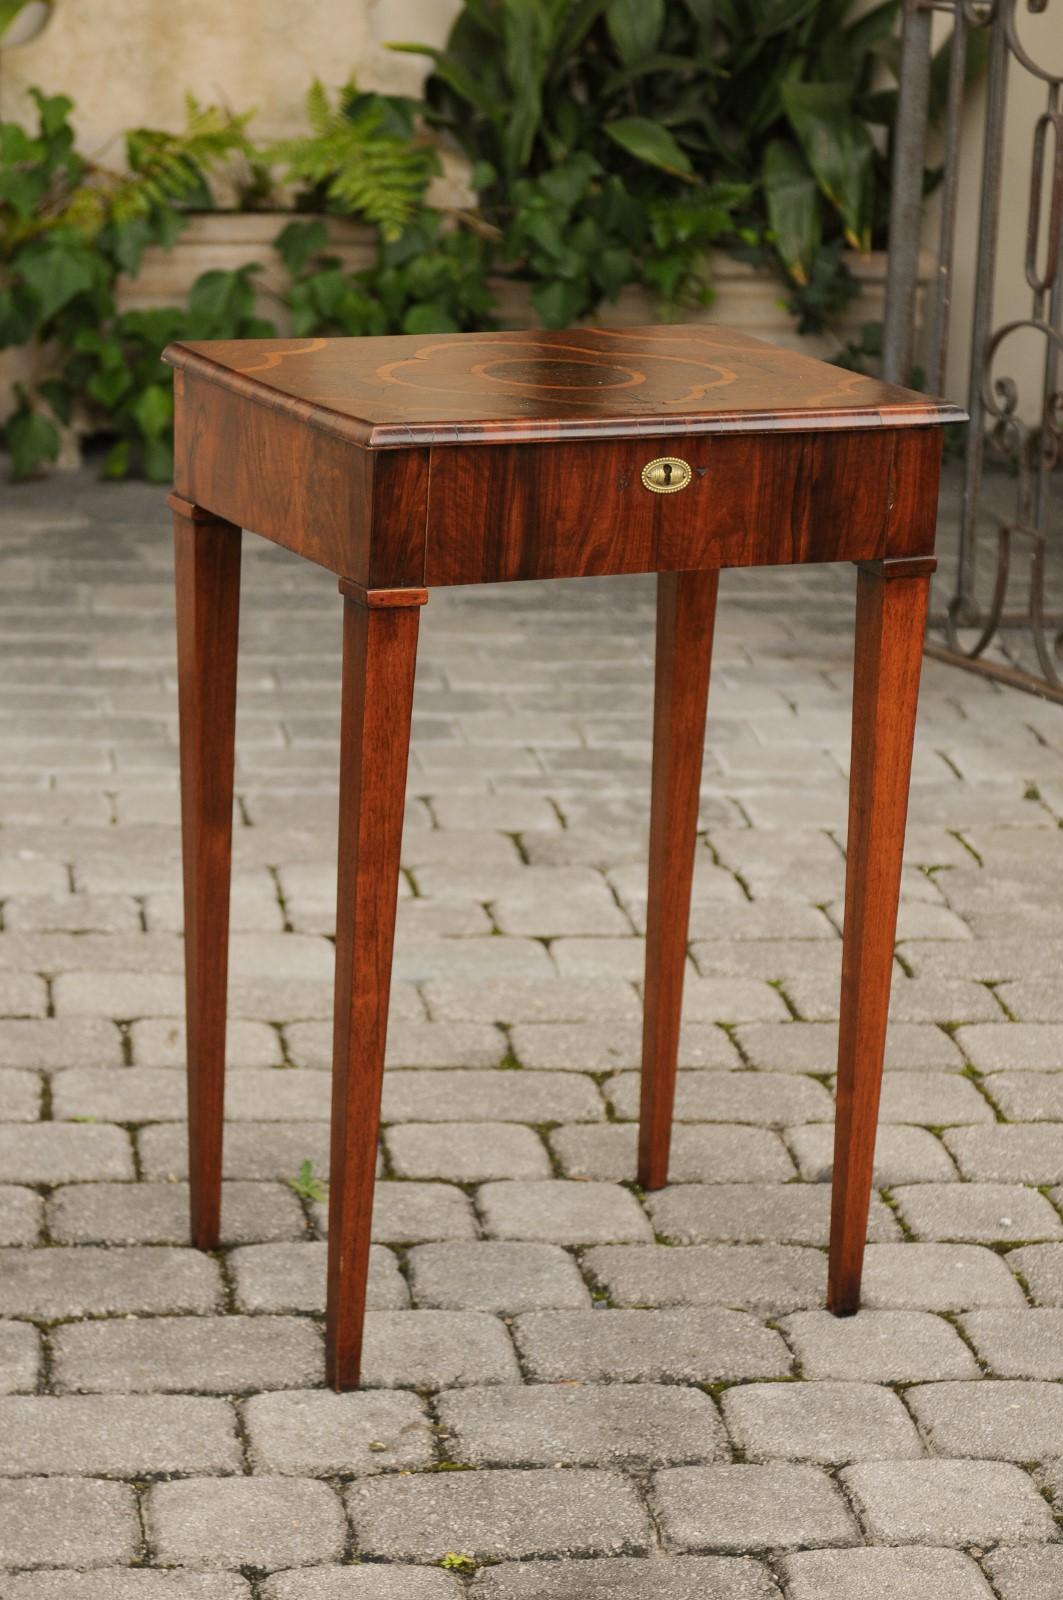 An Italian walnut side table from the early 19th century with oyster veneered top, quadrilobe inlay, single drawer and tapered legs. Born in the first quarter of the 19th century, this Italian walnut table features an exquisite oyster veneered top,